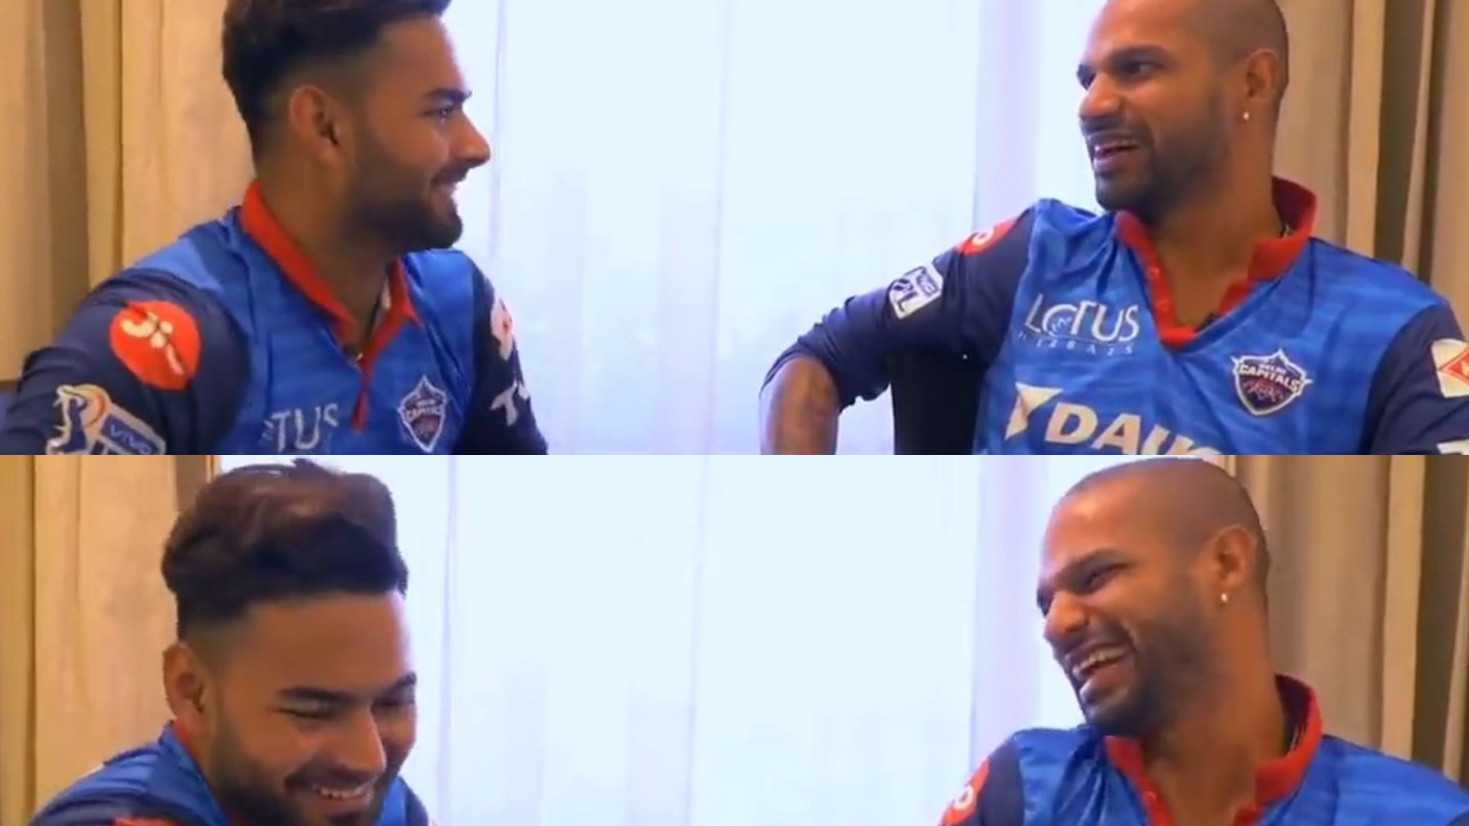 WATCH- Old video of Shikhar Dhawan advising Rishabh Pant to drive slowly goes viral after his terrible accident